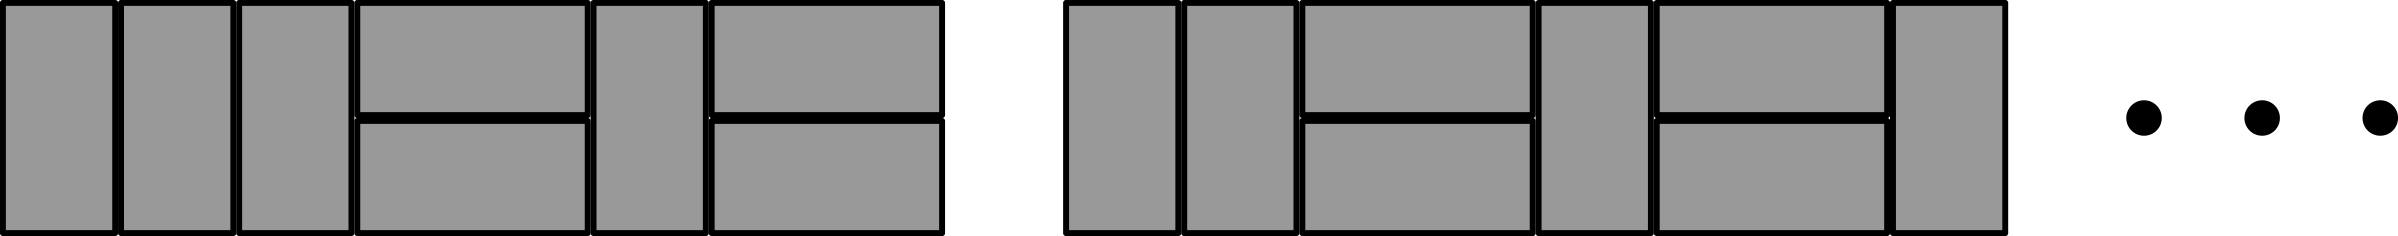 The first arrangement has three vertical rectangles, then a pair of horizontal rectangles, then a vertical rectangle, then a pair of horizontal rectangles. The second has two vertical rectangles, then a pair of horizontal rectangles, then a vertical rectangle, then a pair of horizontal rectangles, then a vertical rectangle.